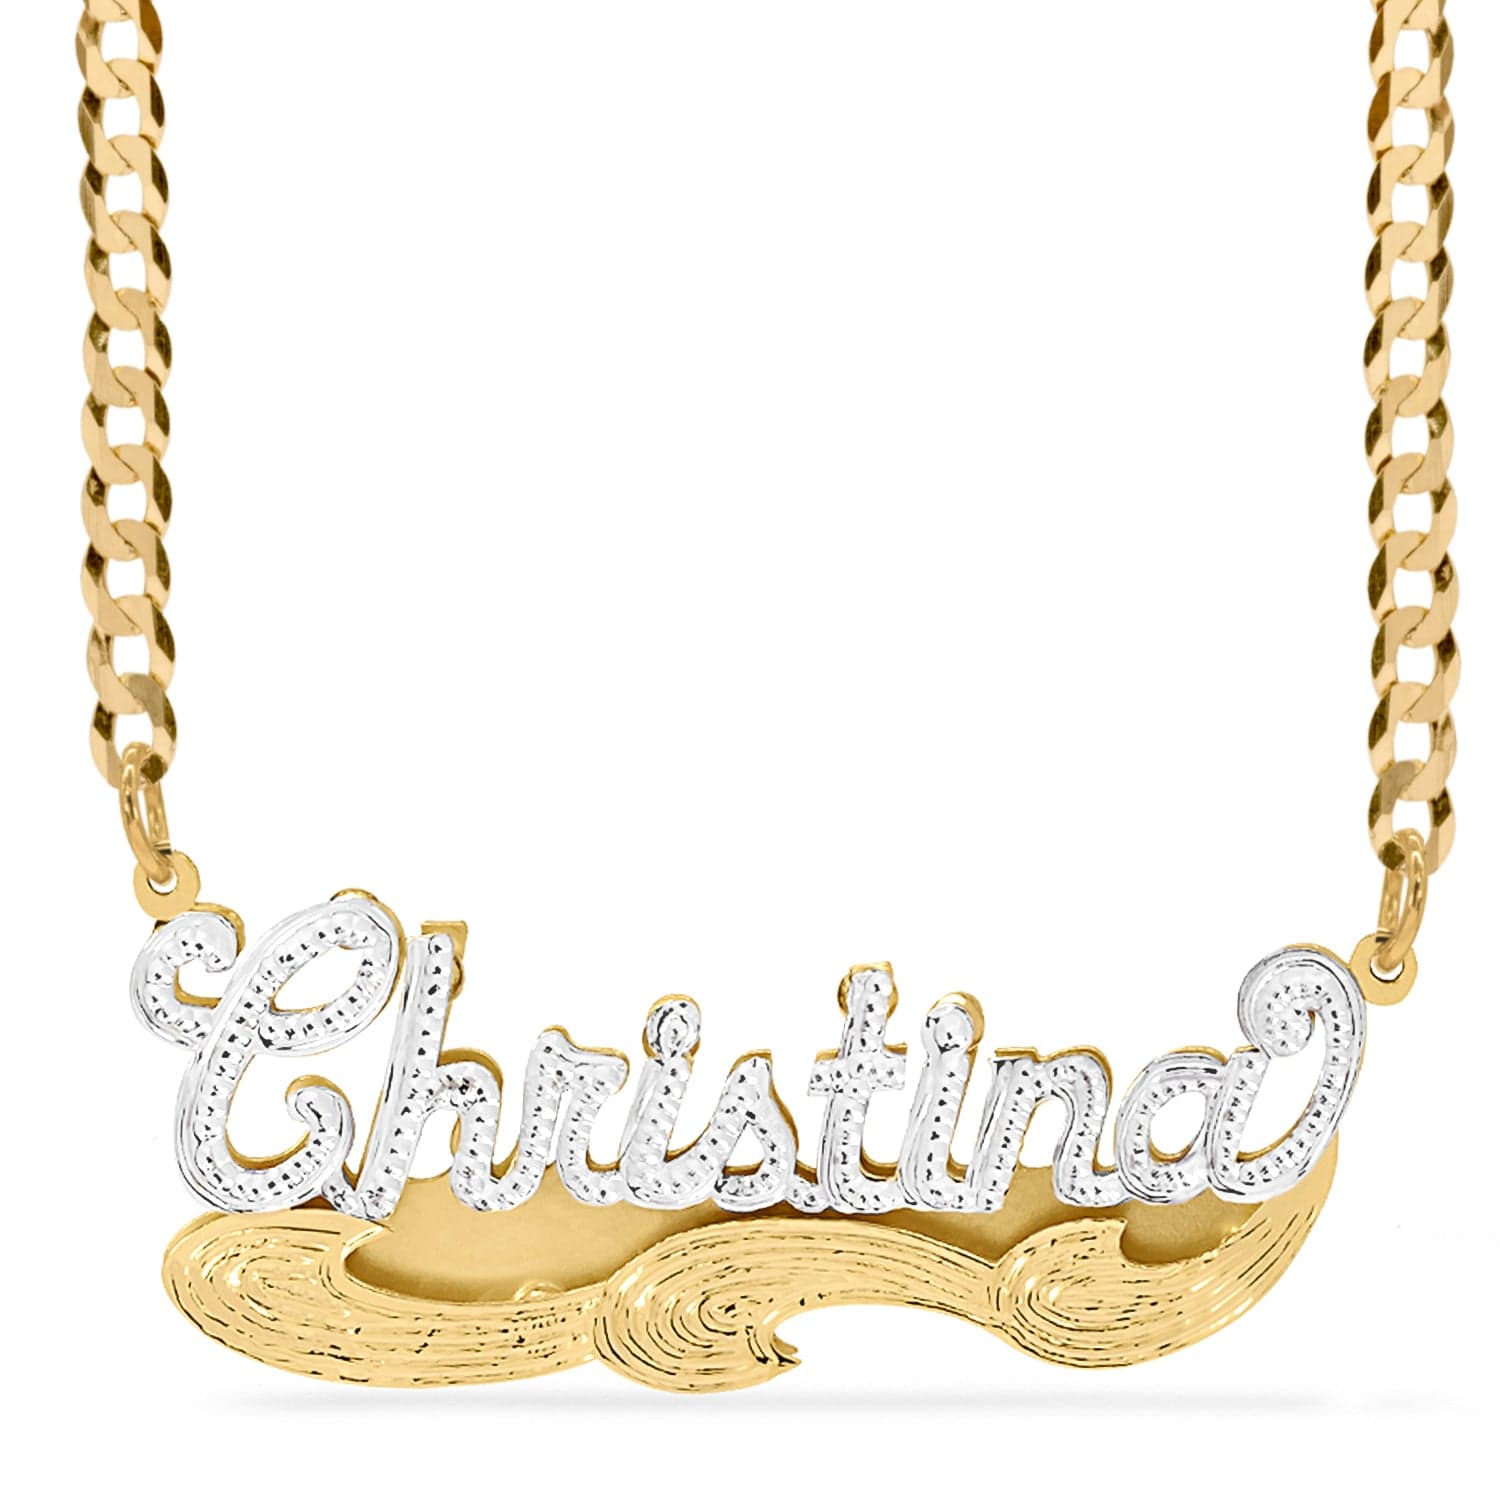 Two-Tone. Sterling Silver / Cuban Chain Double Name Necklace w/Beading "Christina" with Cuban chain